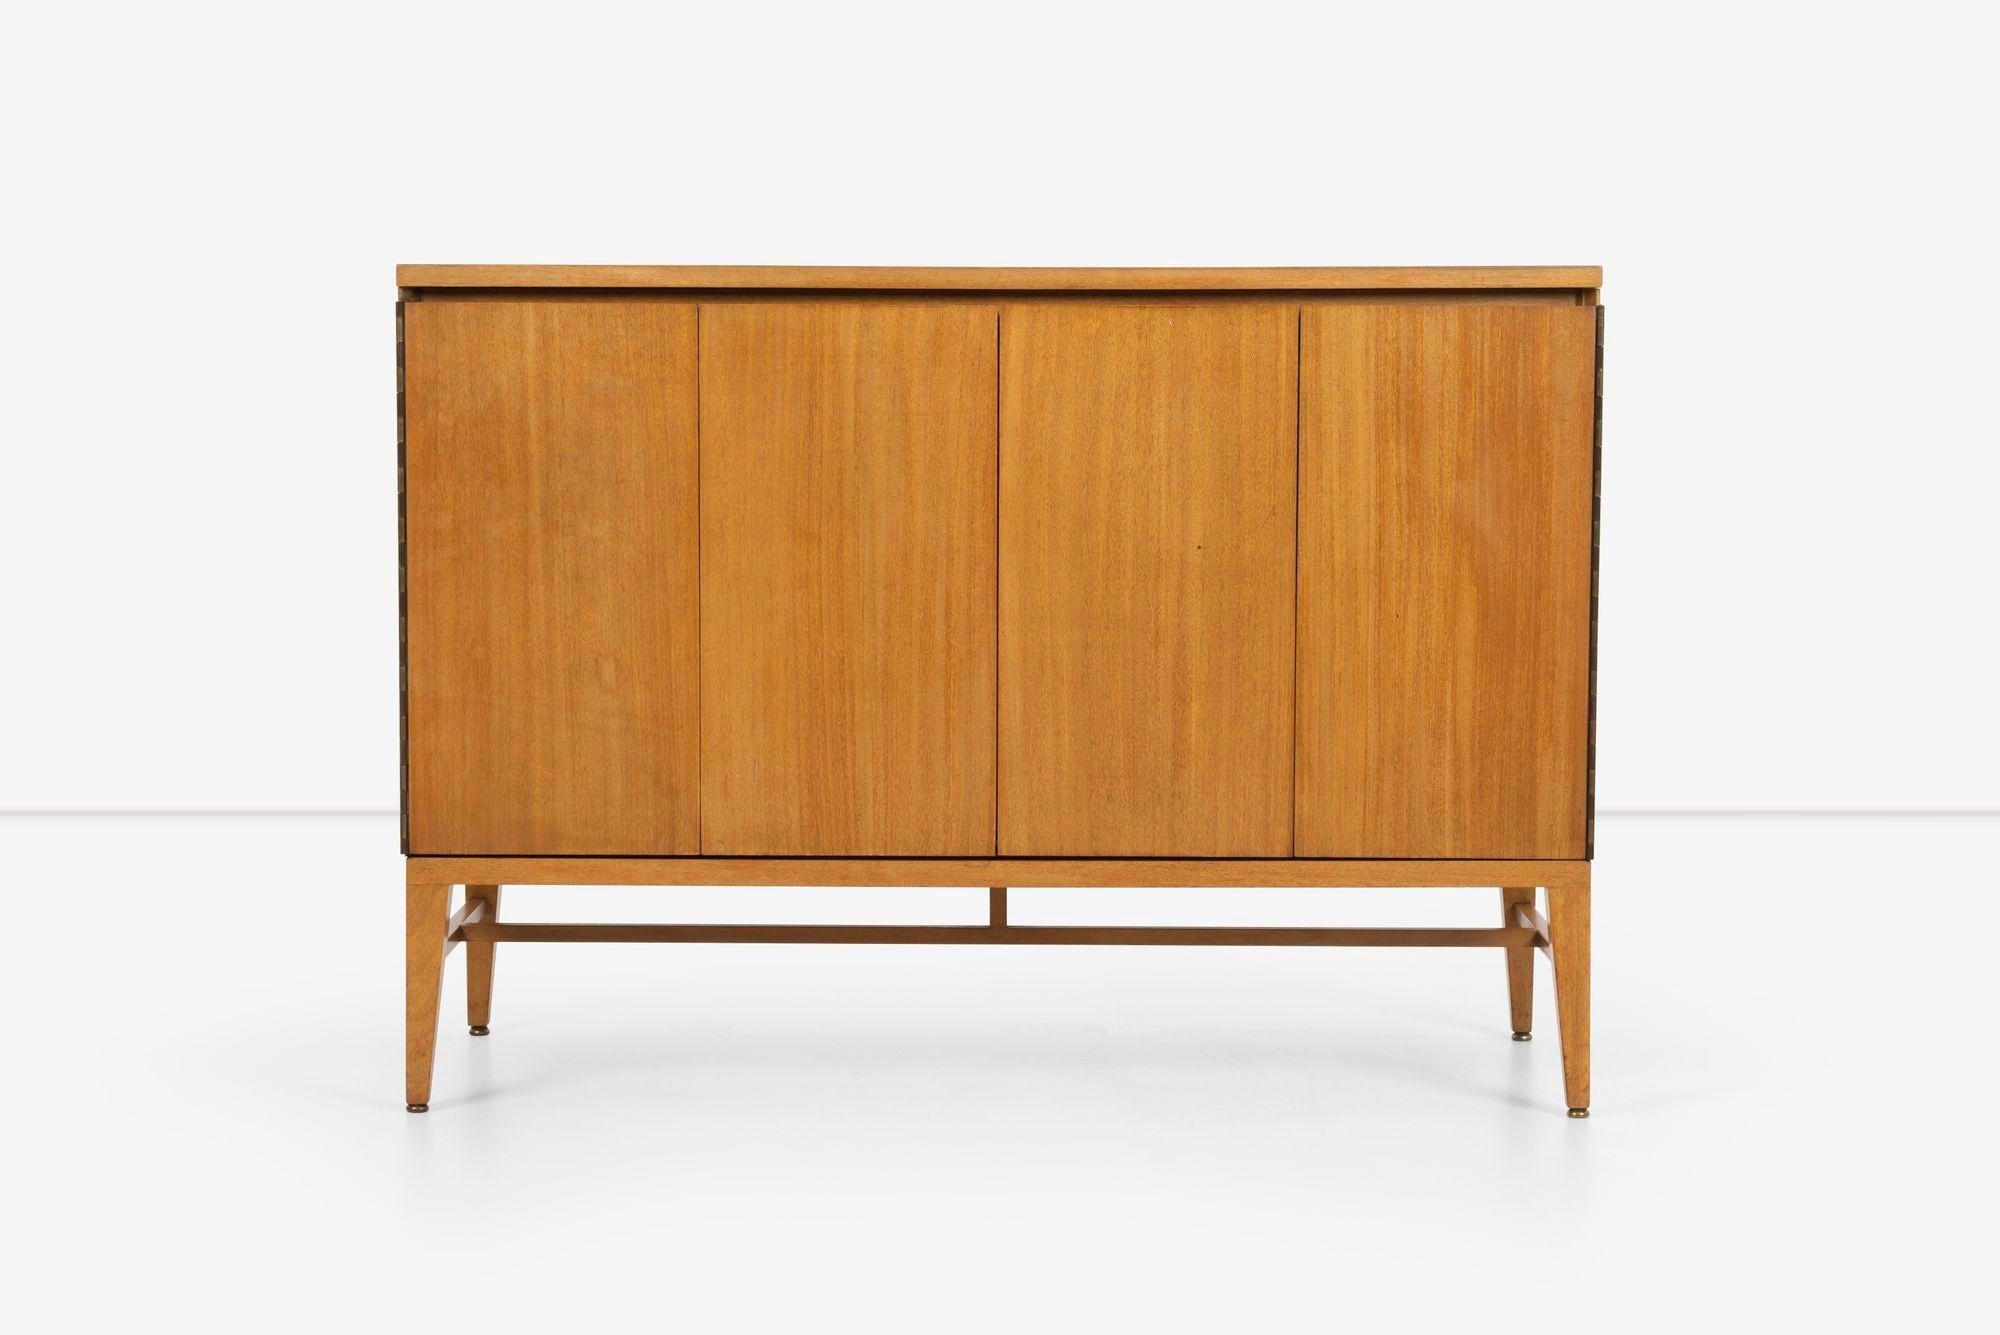 Paul McCobb Dresser for Calvin, features a rich Mahogany veneer. Its bi-fold doors, mounted on piano hinges, open up to reveal four spacious drawers. Additionally, the dresser offers convenient side compartment vertical storage alongside an